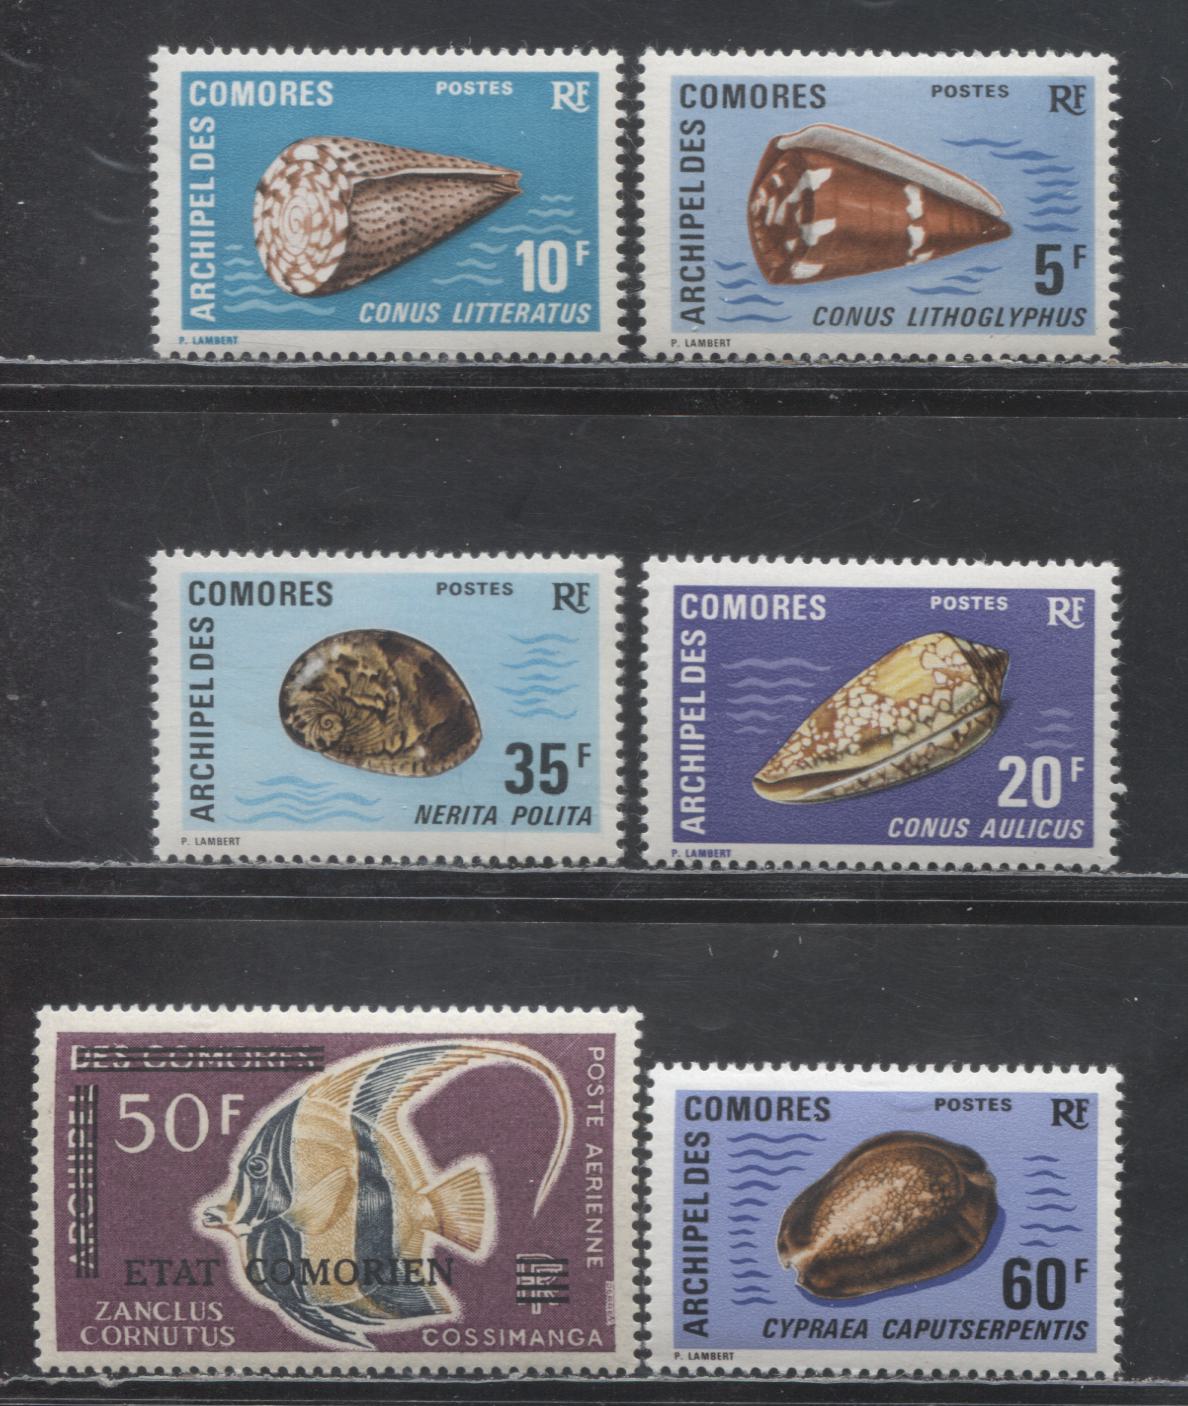 Lot 178 Comoro Islands SC#99/C74 1971-1975 Shells - Overprinted Airmail Issues, 6 VFNH & OG Singles, Click on Listing to See ALL Pictures, Estimated Value $25